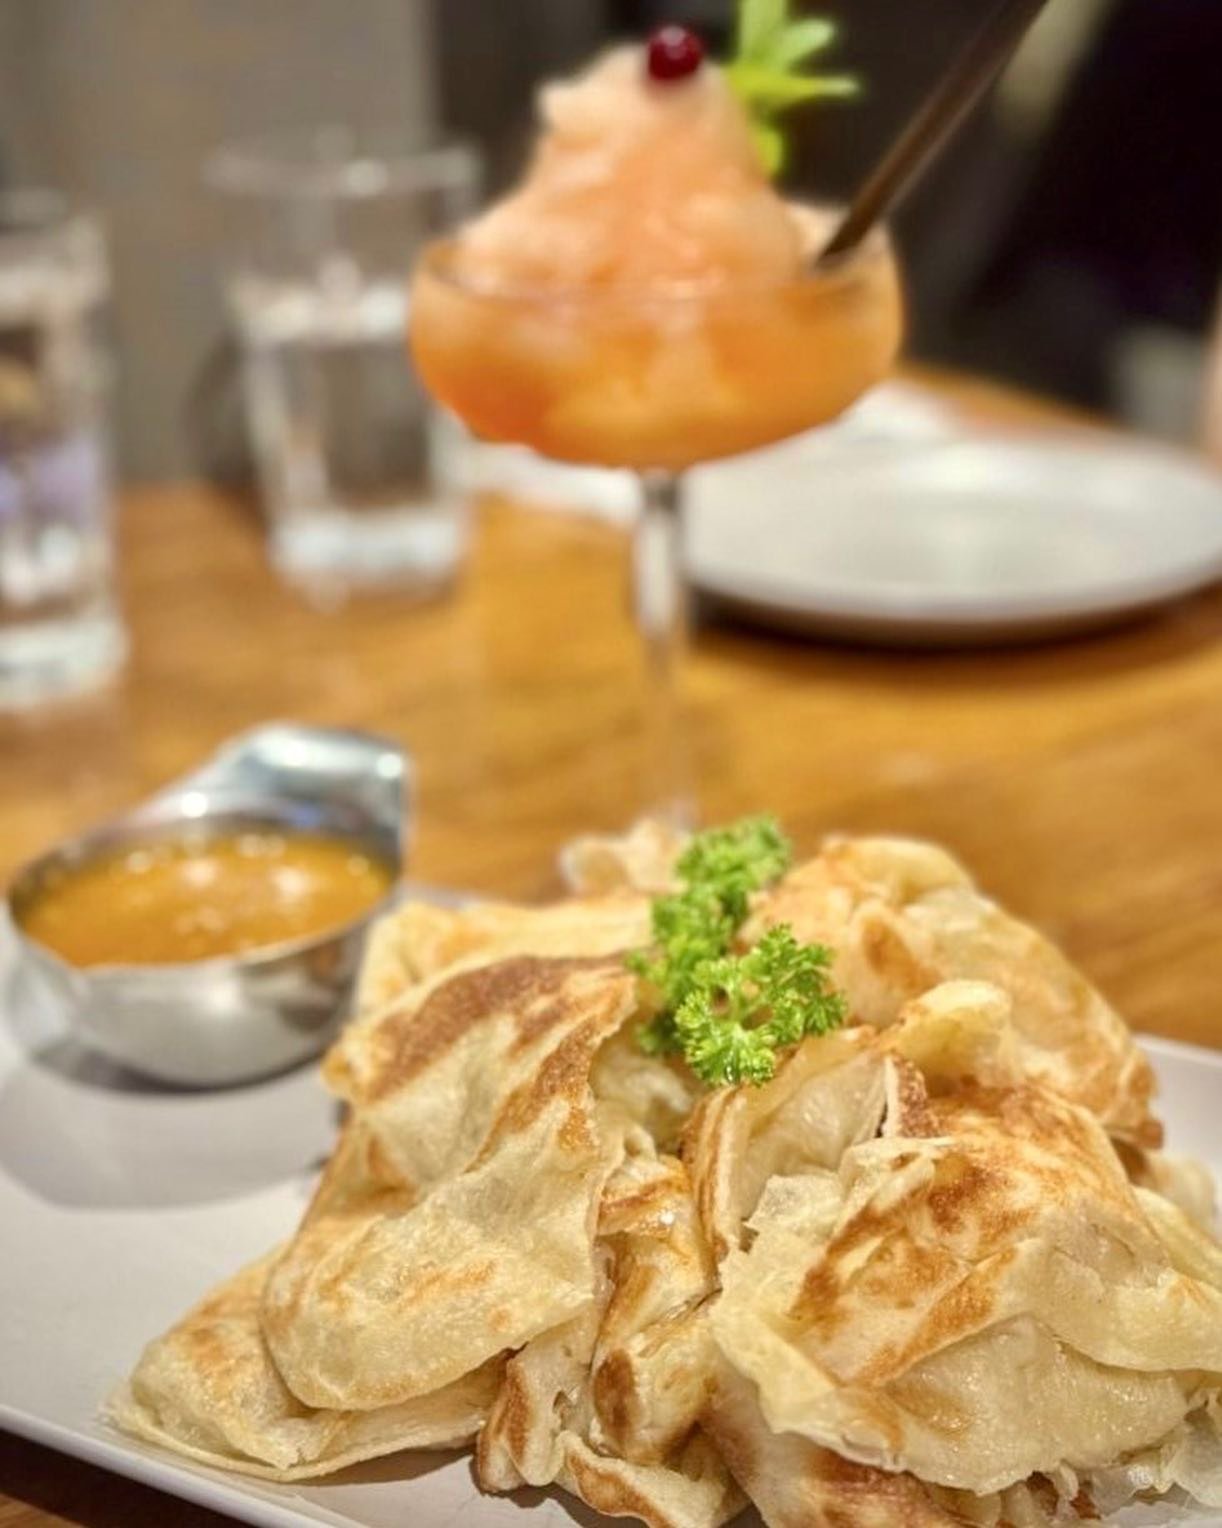 Experience the buttery, flaky bliss of our Roti Canai! Soft layers, crispy exterior - it&rsquo;s the best flatbread out there! 🤤

📍1779 Robson St, Vancouver, BC
📷: @armitathefoodie 

#bananaleafvan #bananaleaf #vancouver #malaysian #food #malaysia